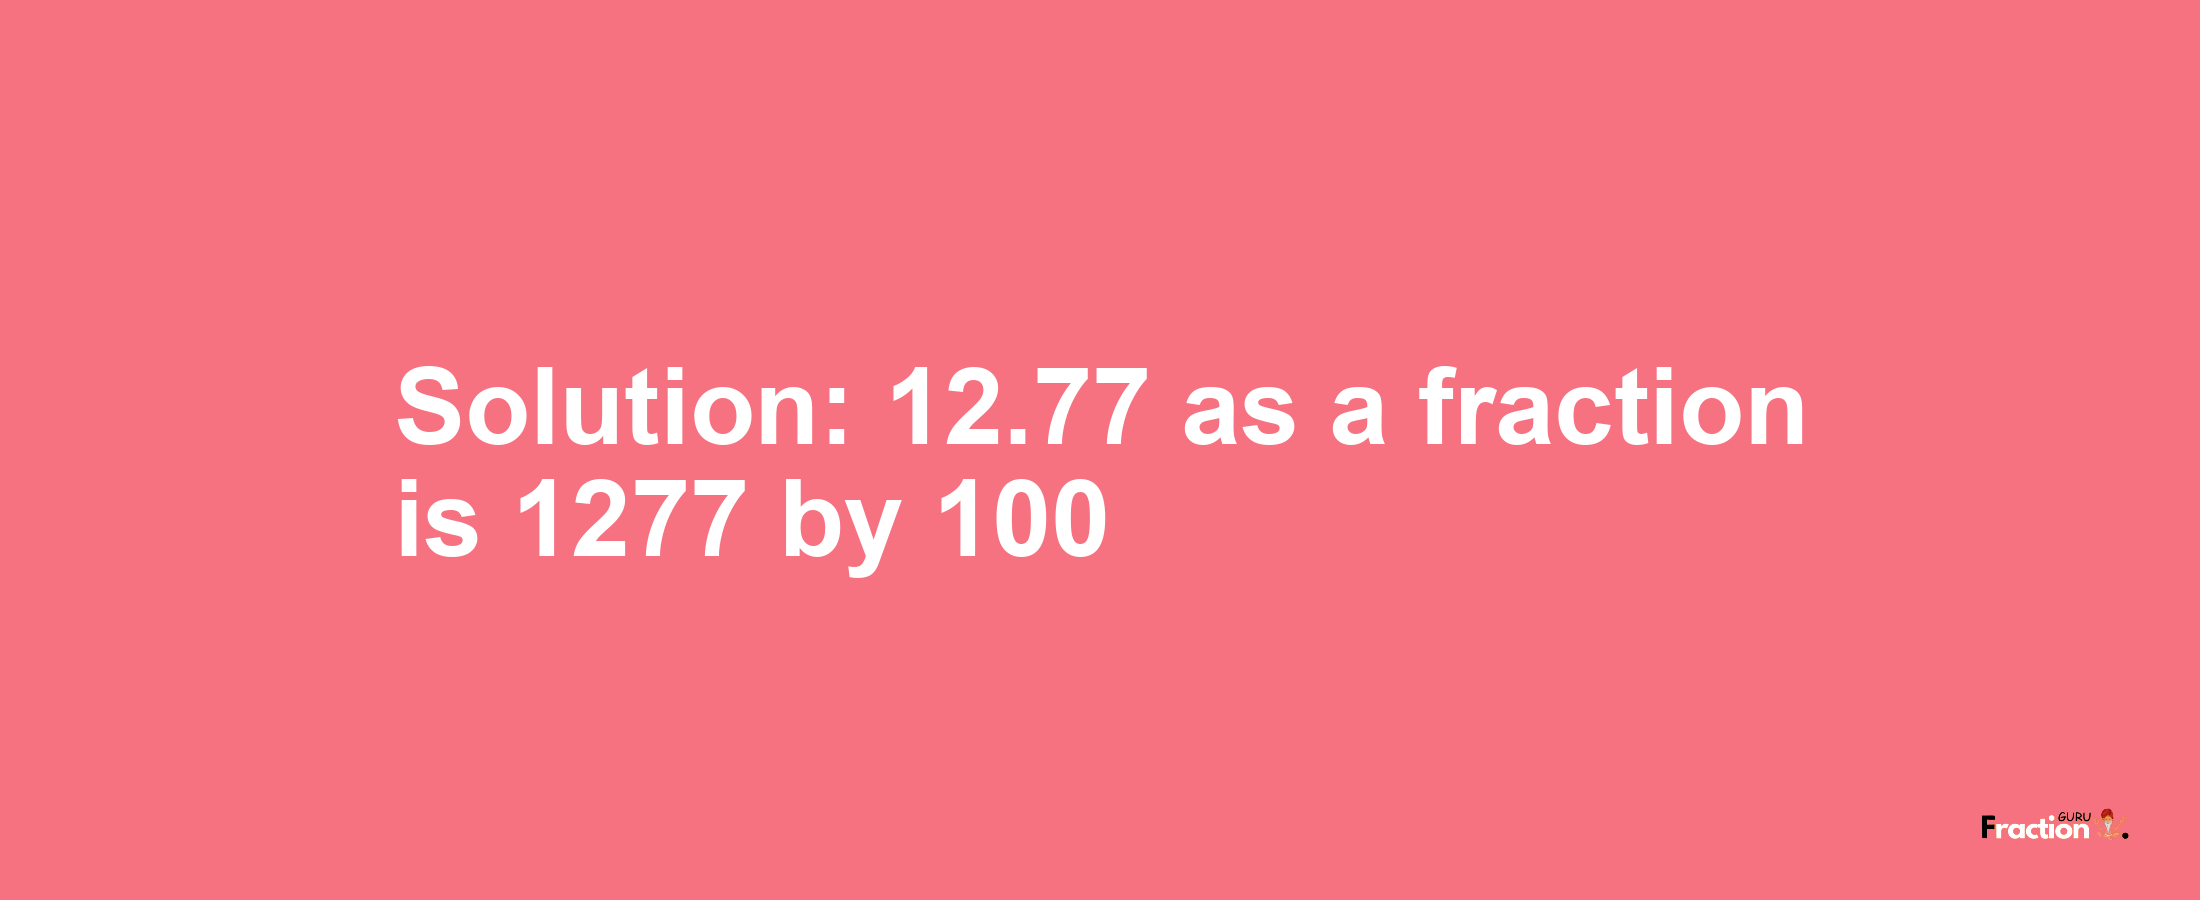 Solution:12.77 as a fraction is 1277/100